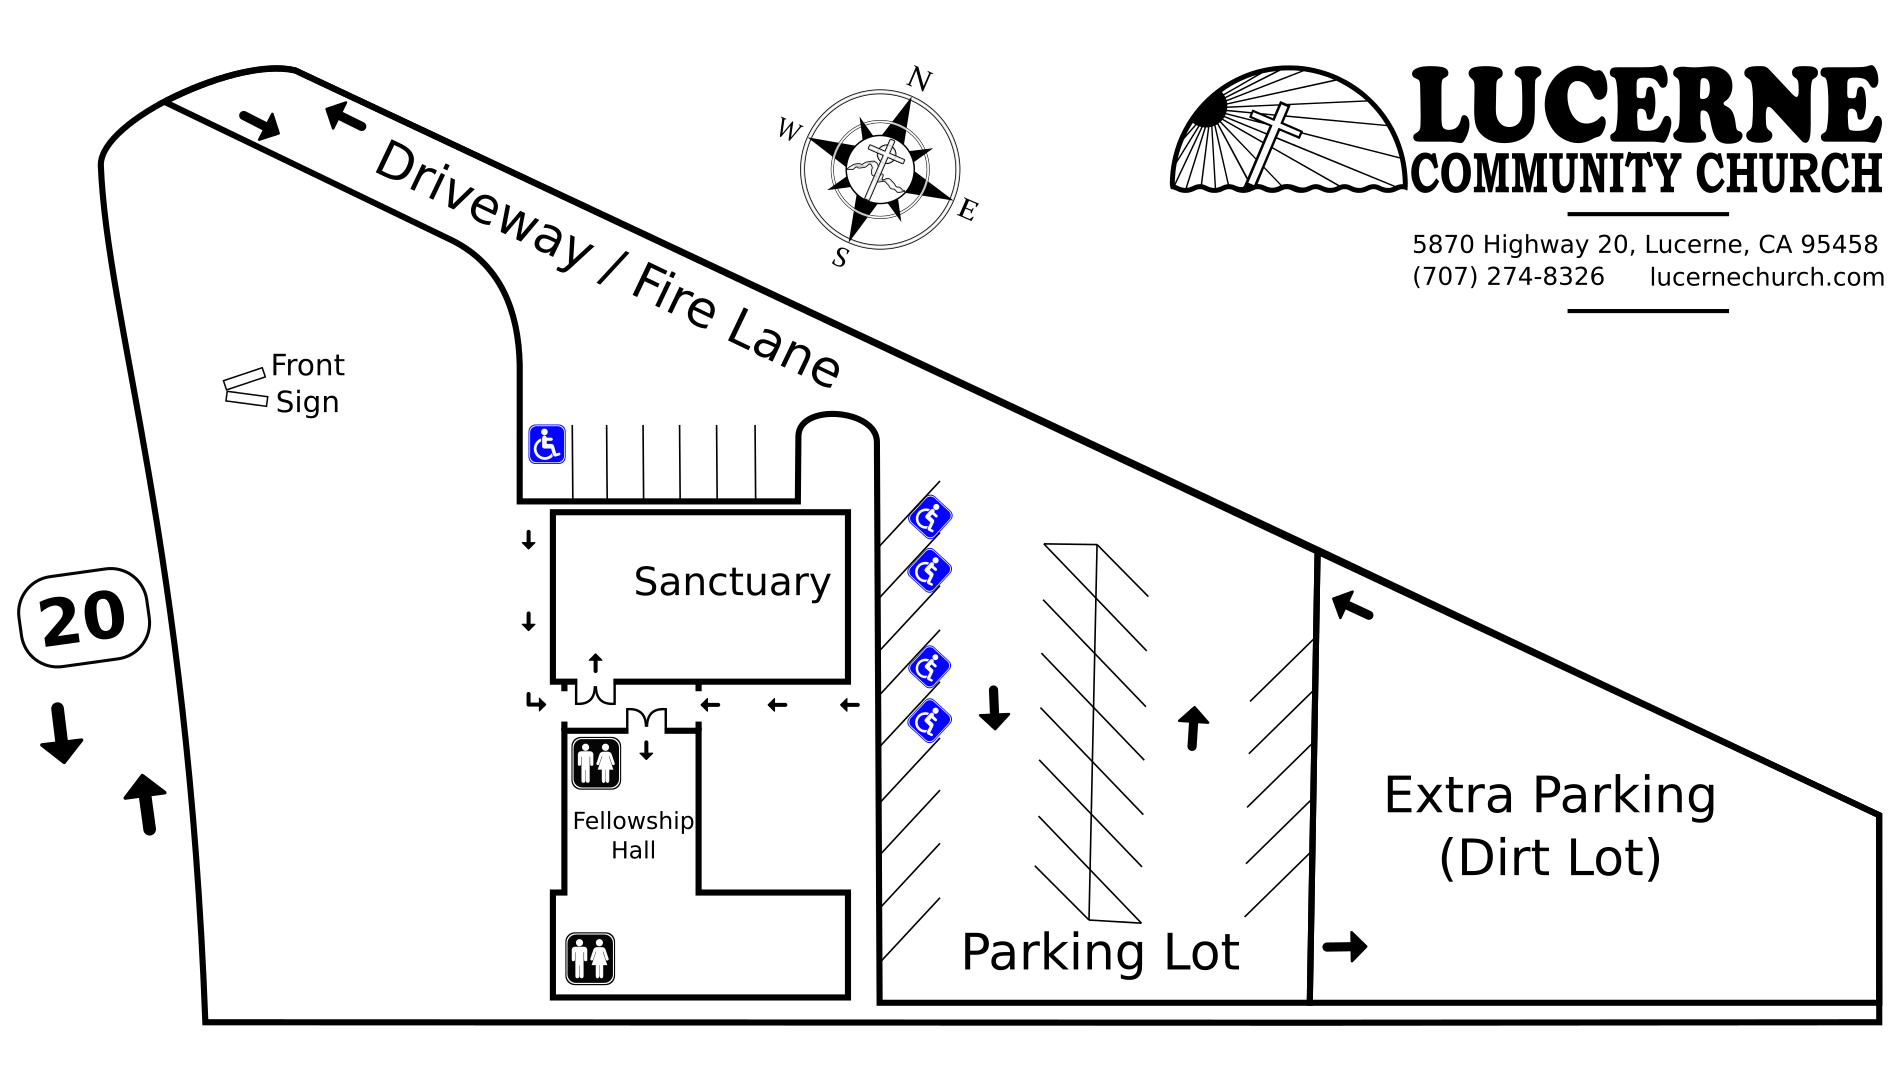 Diagram of the building and parking lot.